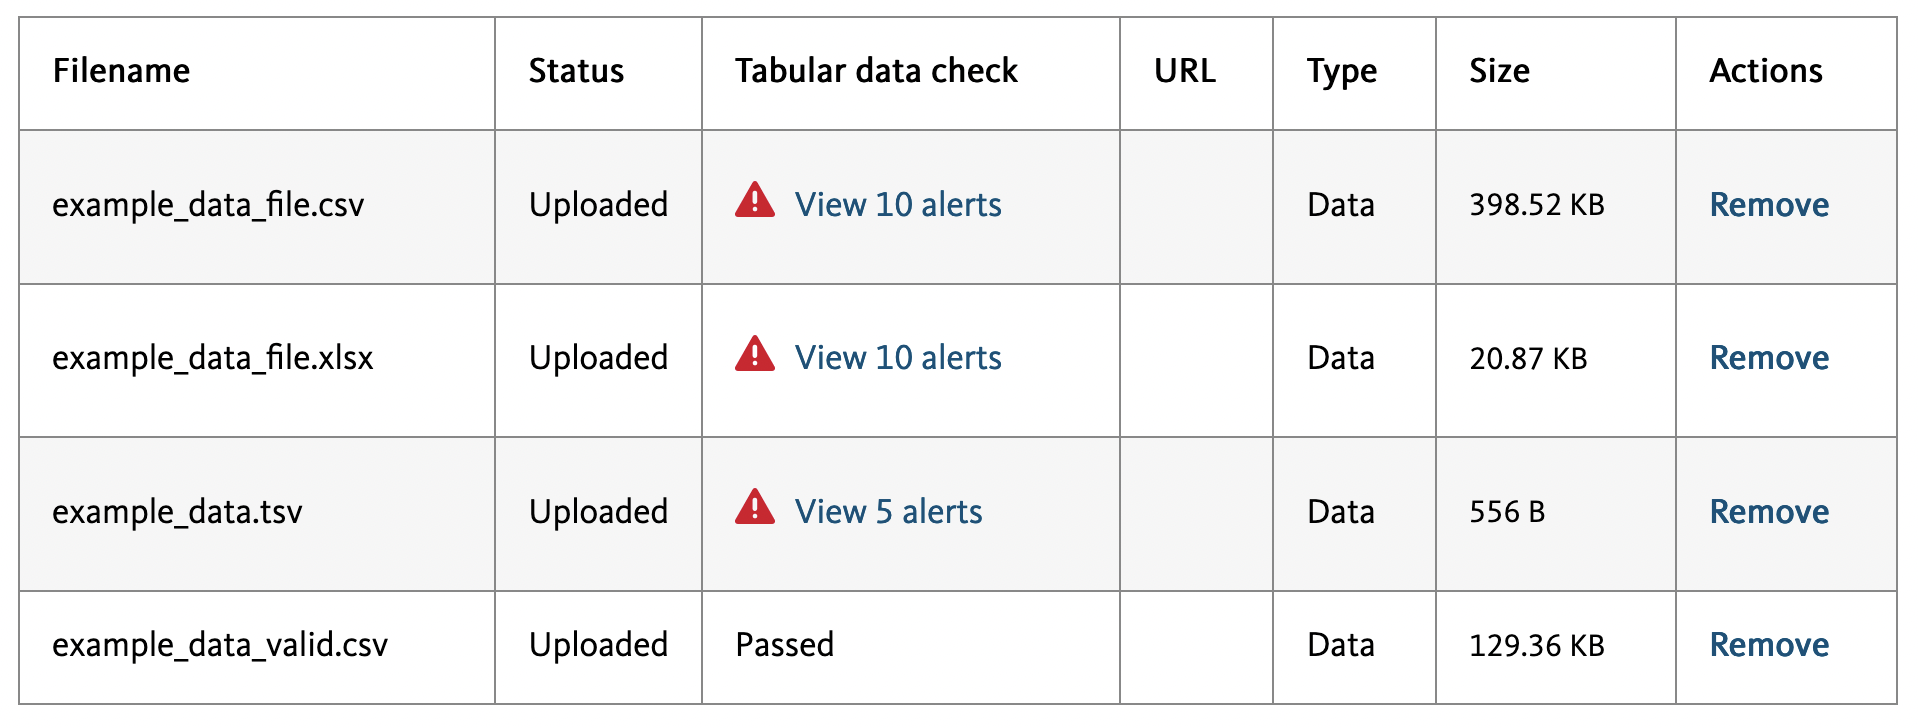 Screenshot showing an example upload table, with tabular data check alert report links.